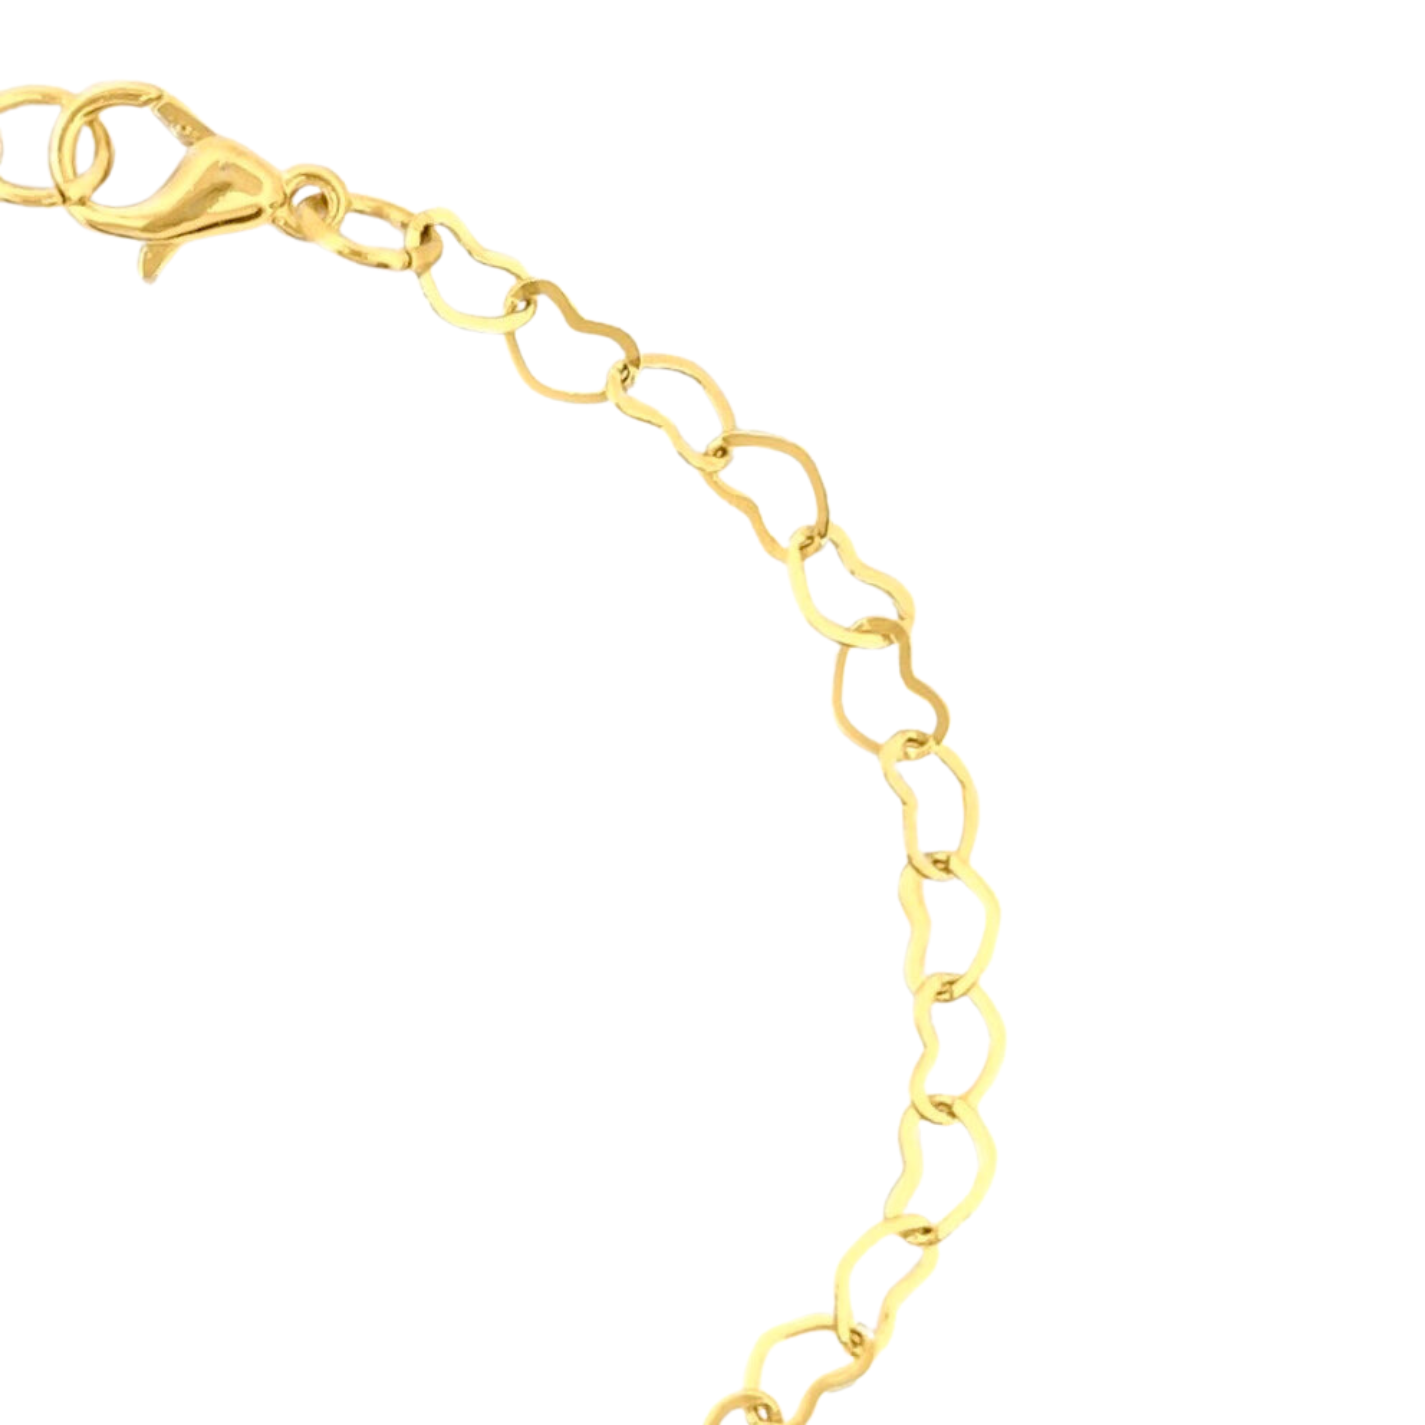 Joyful Hearts Anklet in Gold and Silver